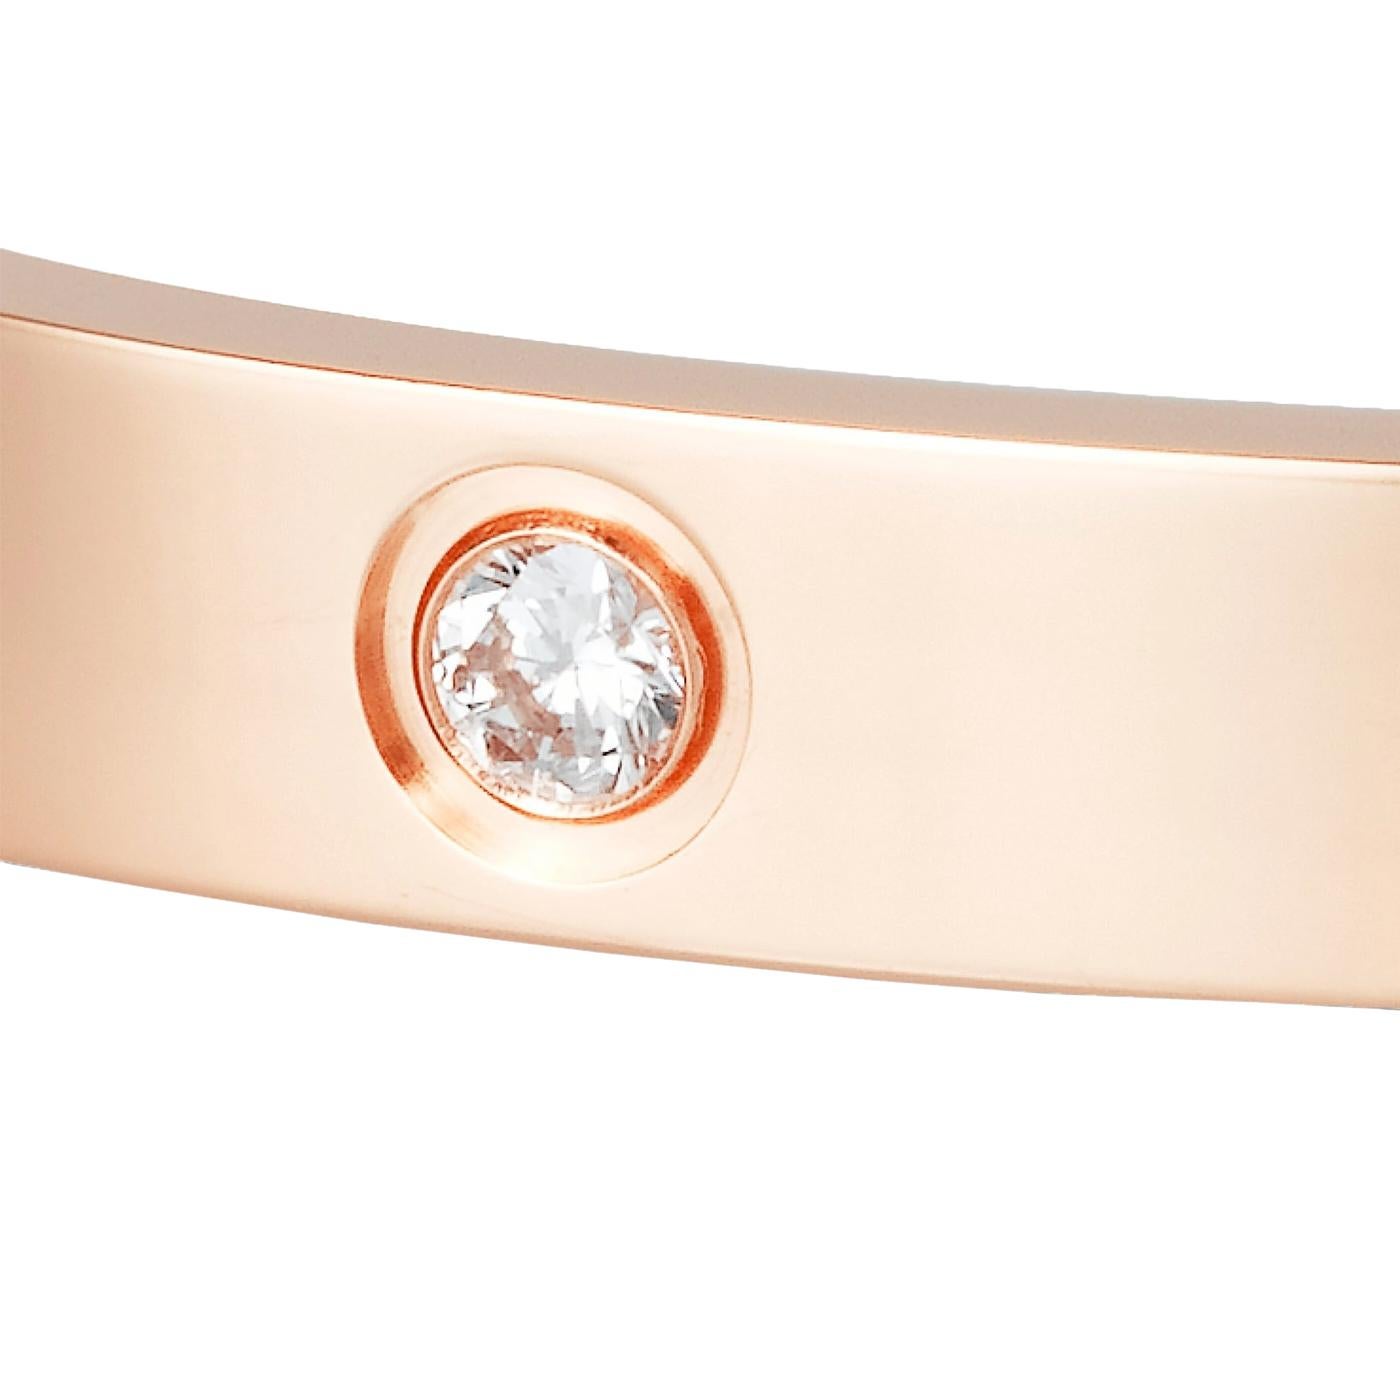 Cartier Love Bracelet 18K Rose Gold Size 17 With Screwdriver Bangle In Good Condition For Sale In Aventura, FL